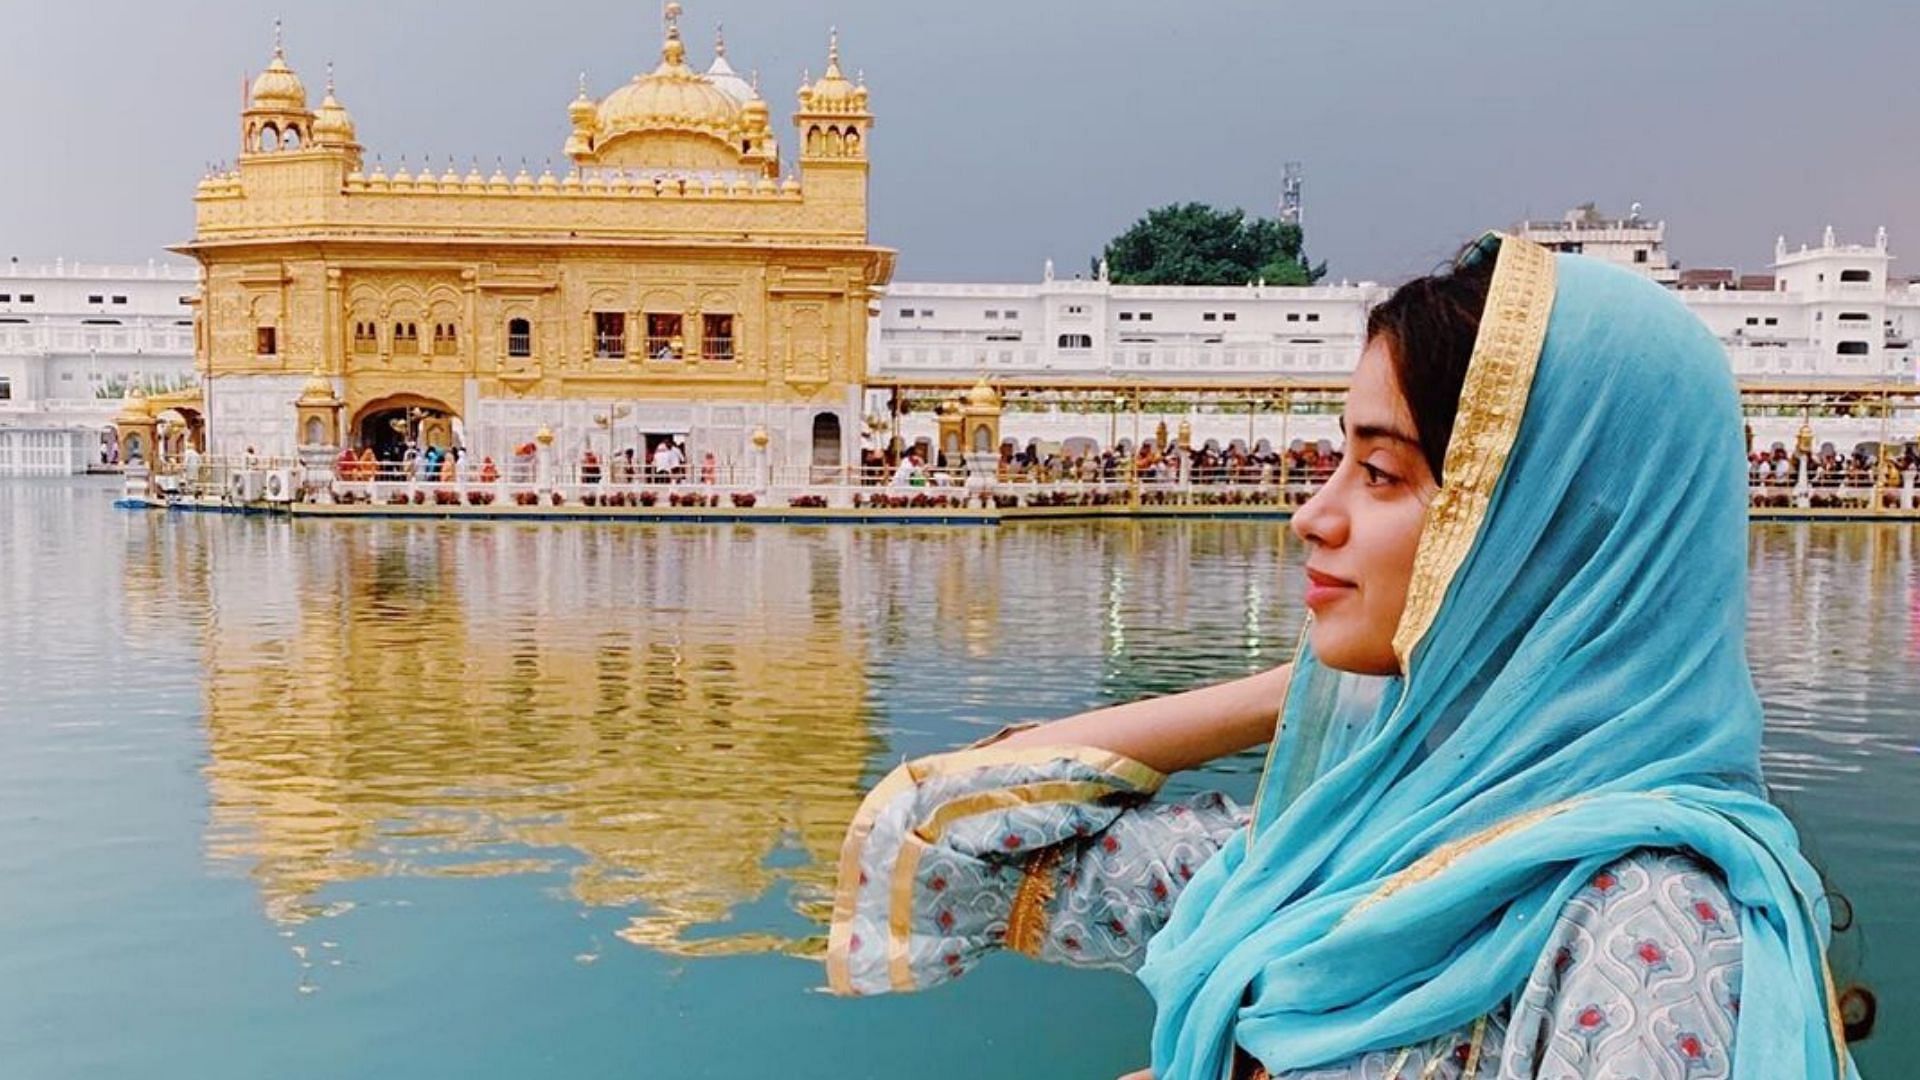 Janhvi Kapoor at the Golden Temple in Amritsar.